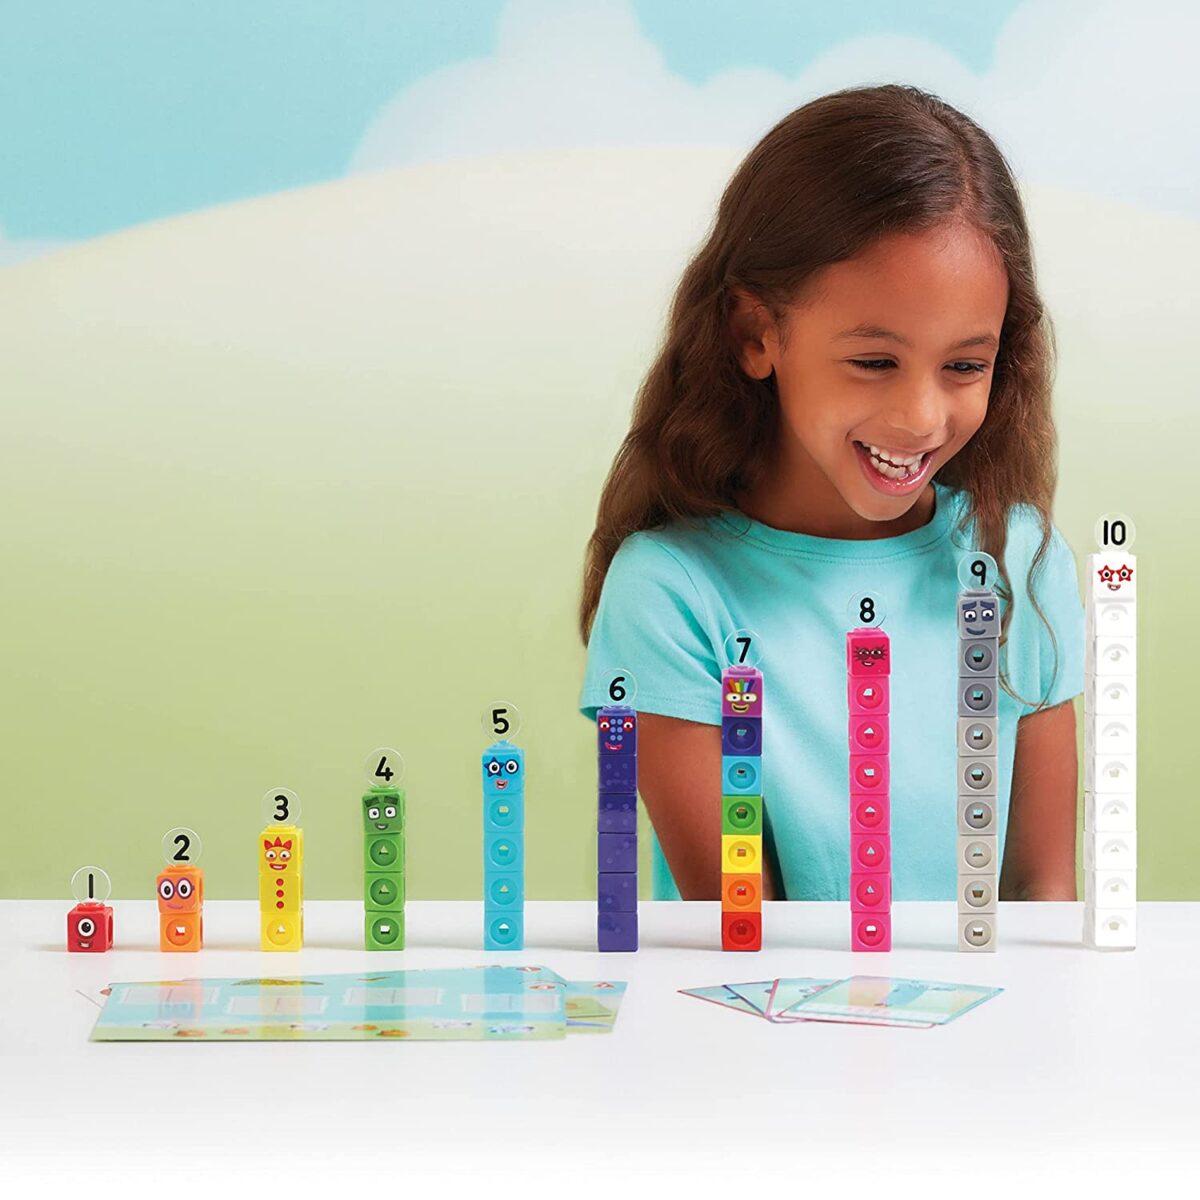 25 Kids Educational Toys That Make Holiday Magic Come To Life